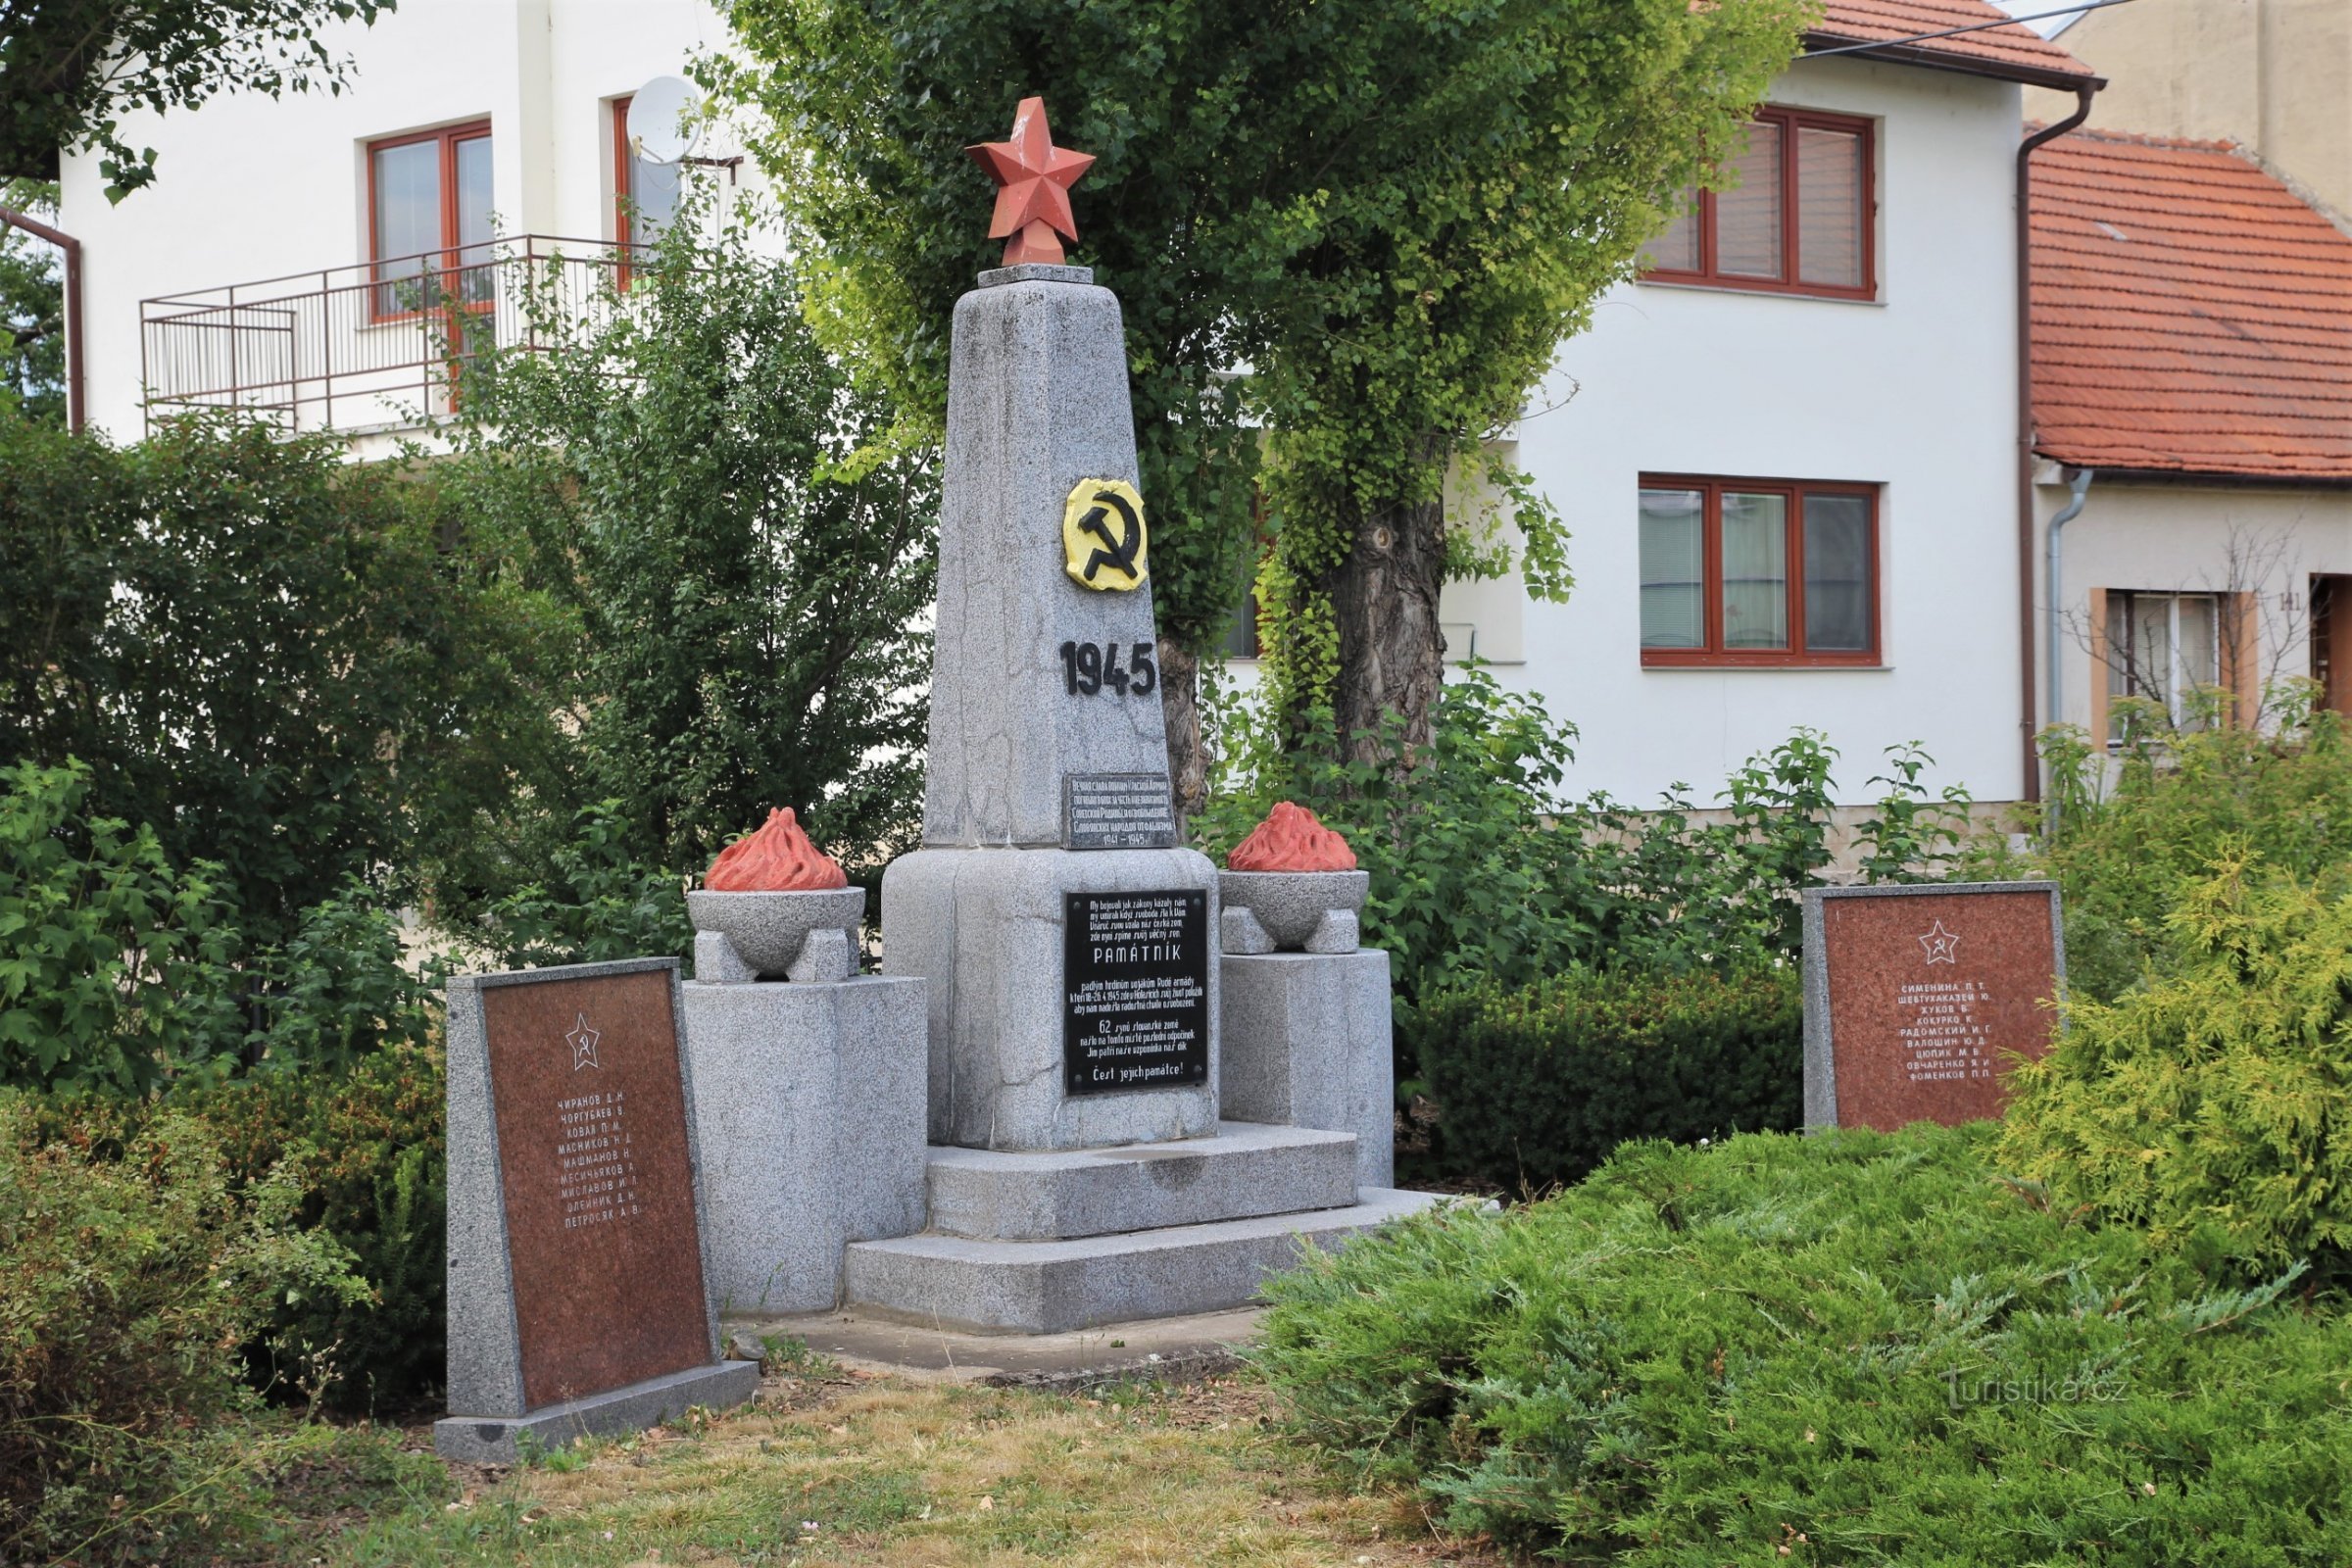 The former monument to fallen Red Army soldiers, which stood here until 2018 - summer 2016